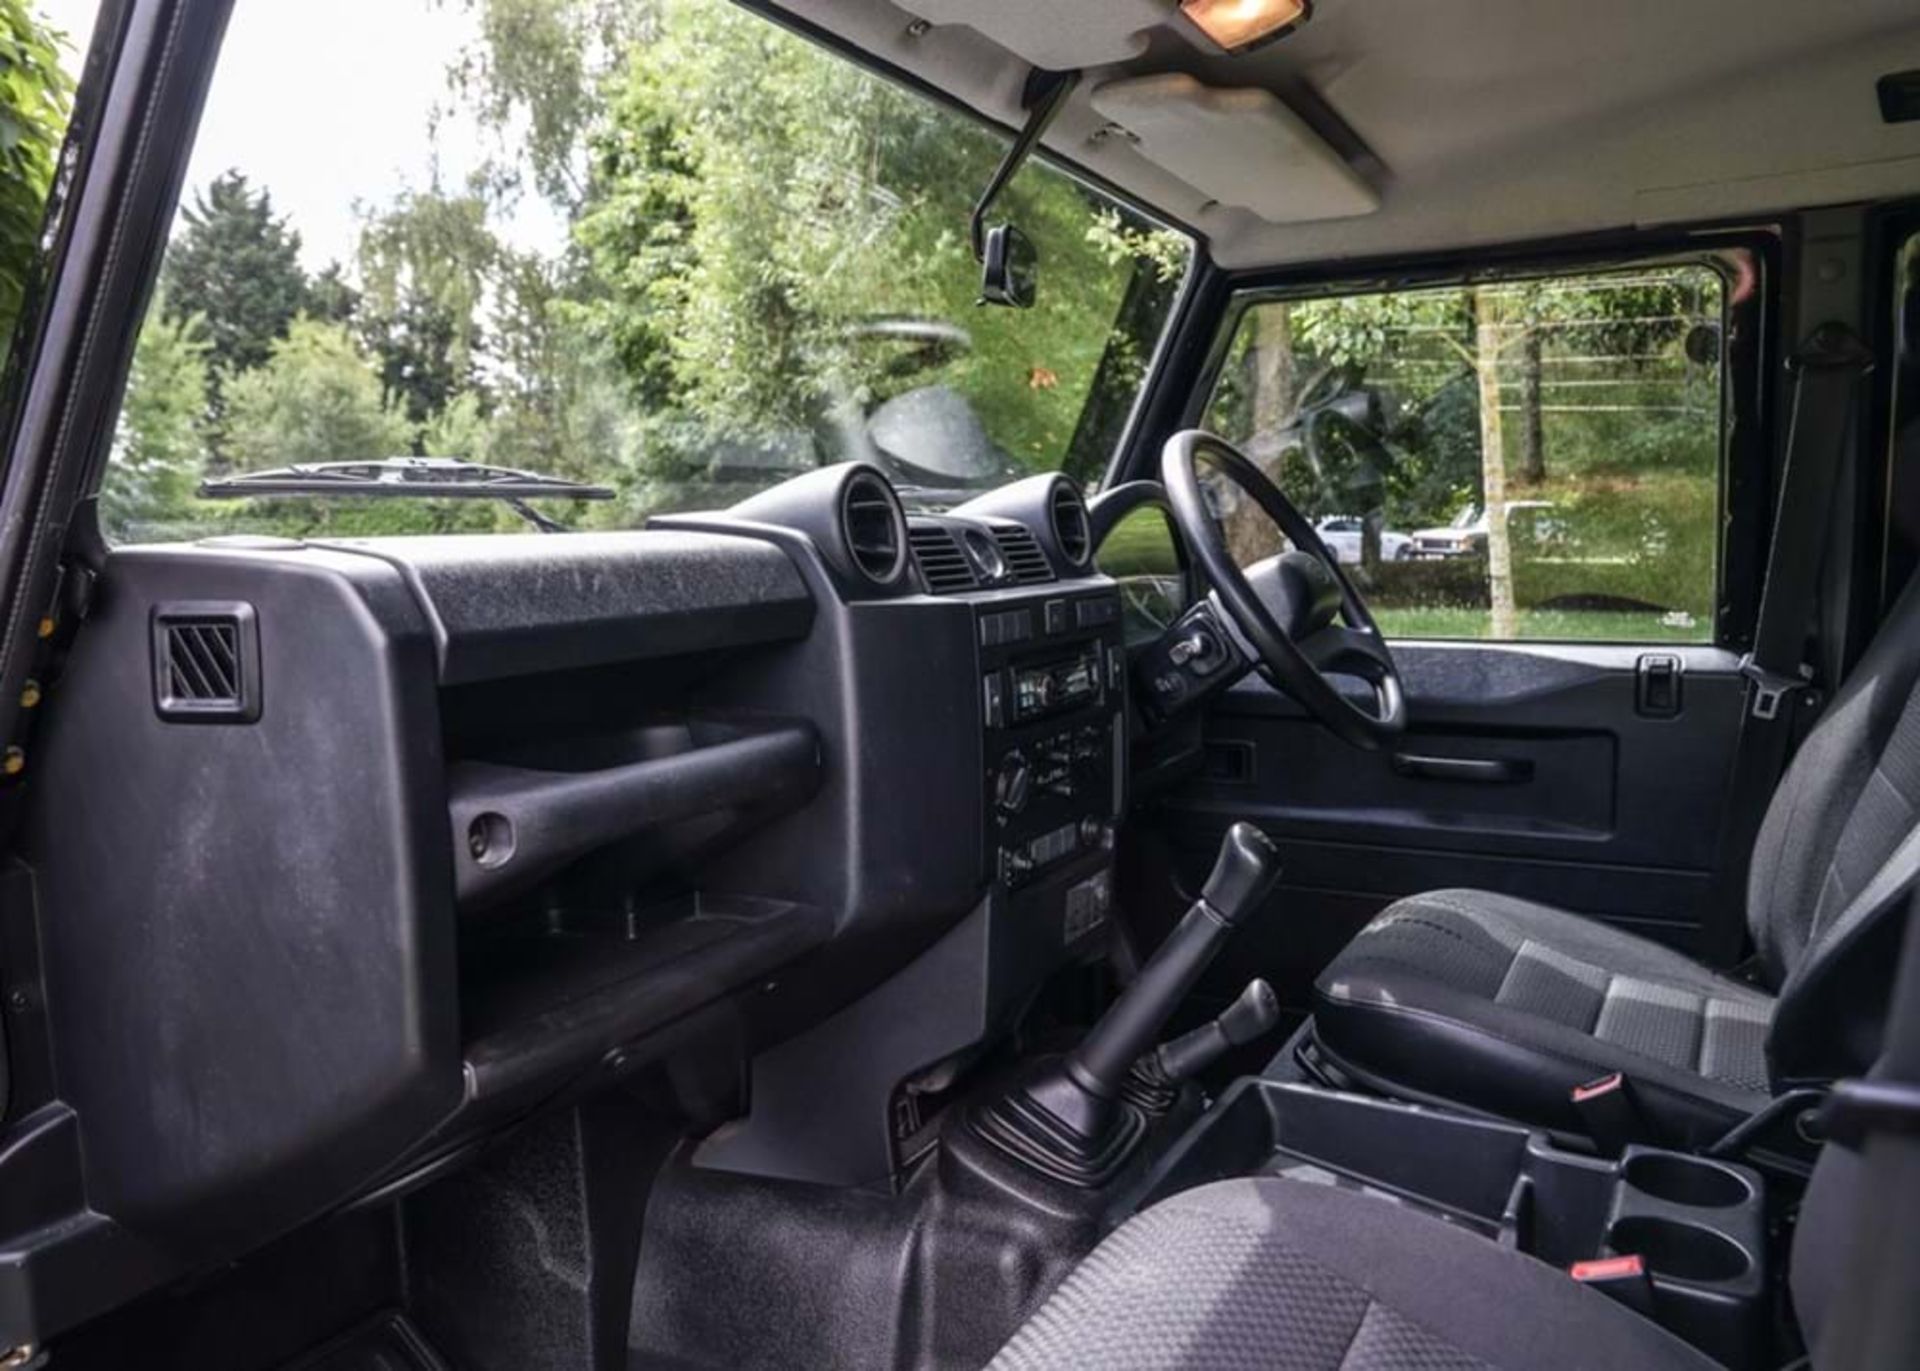 2014 Land Rover Defender 110 Double Cab Pick-Up - Image 6 of 9